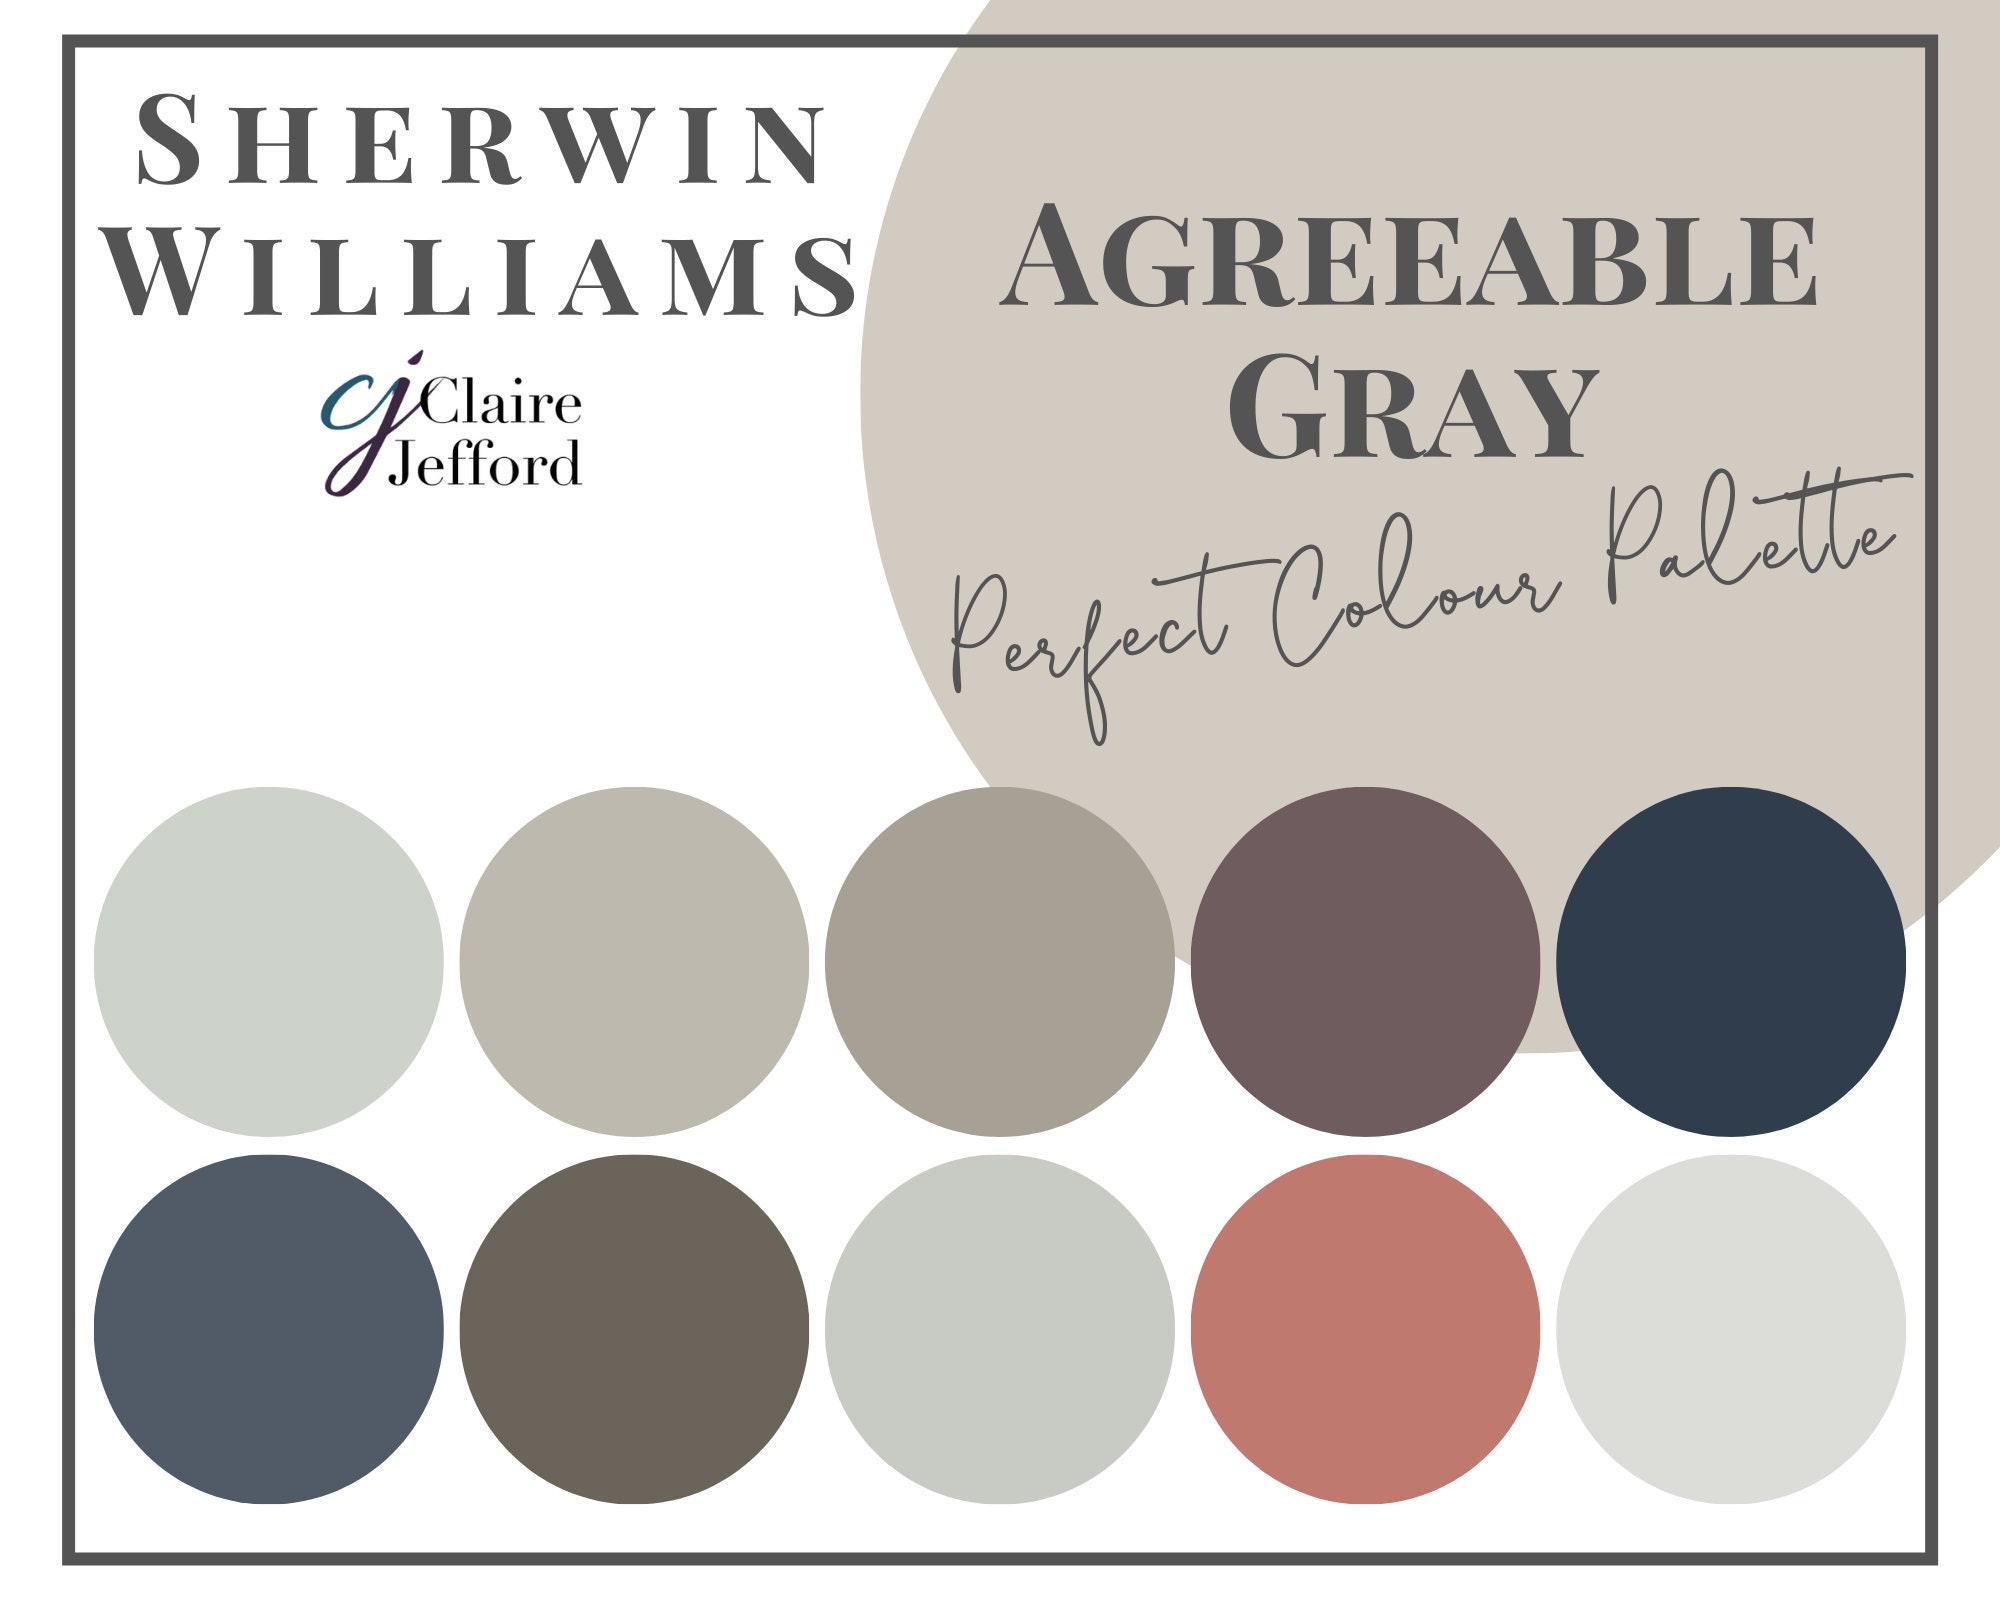 Agreeable Gray Sherwin Williams Interior Paint Color Palette Etsy